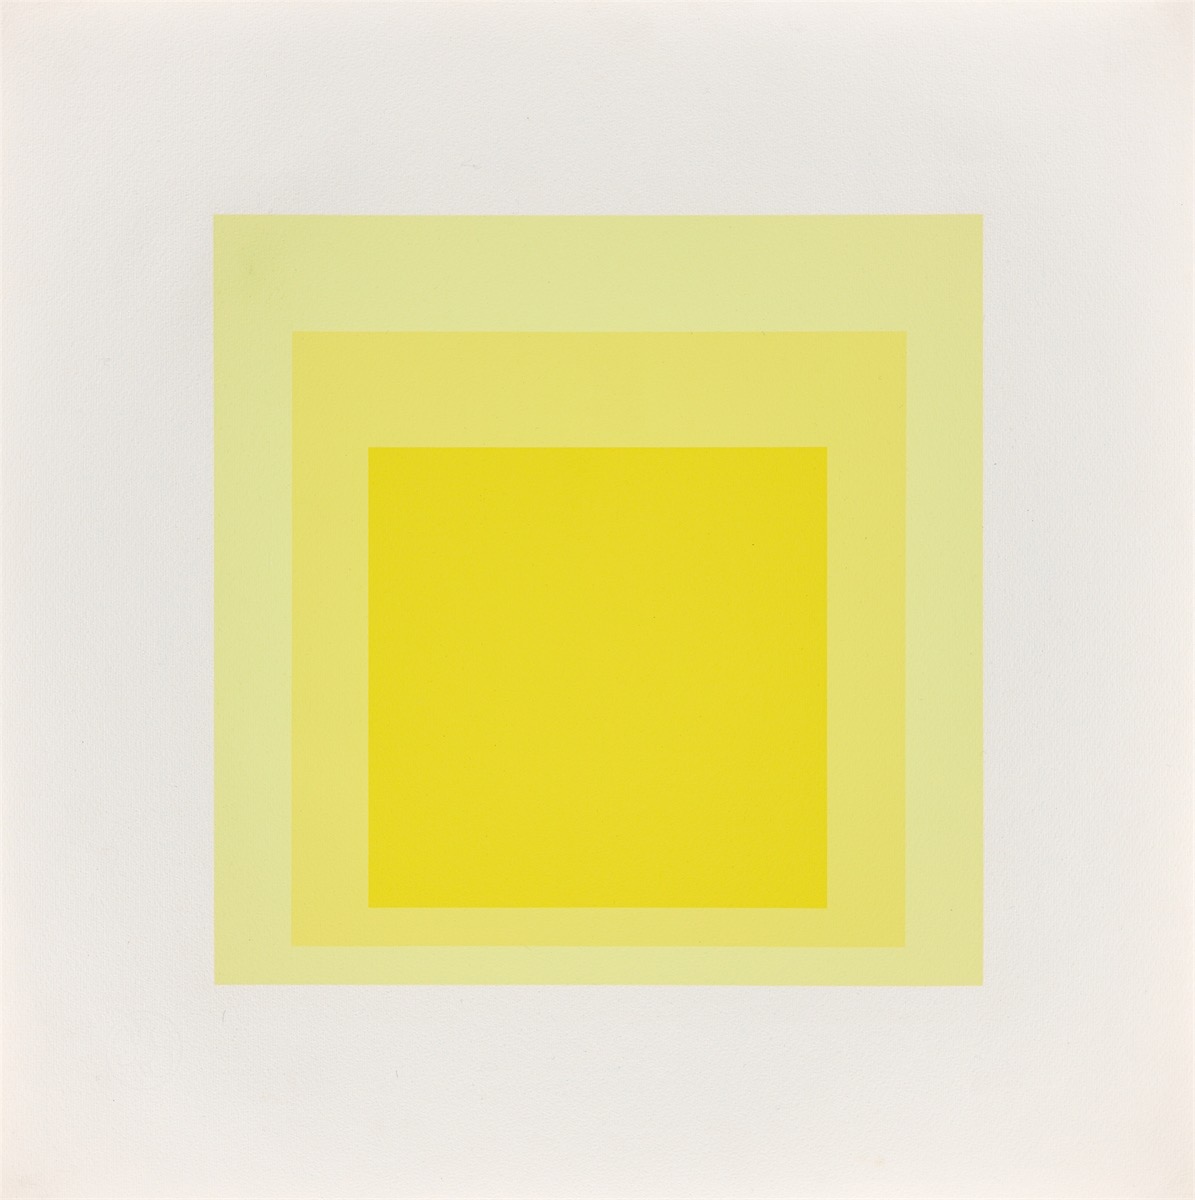 Josef Albers. ”Homage to the Square: Edition Keller I”. 1970 - Image 3 of 8